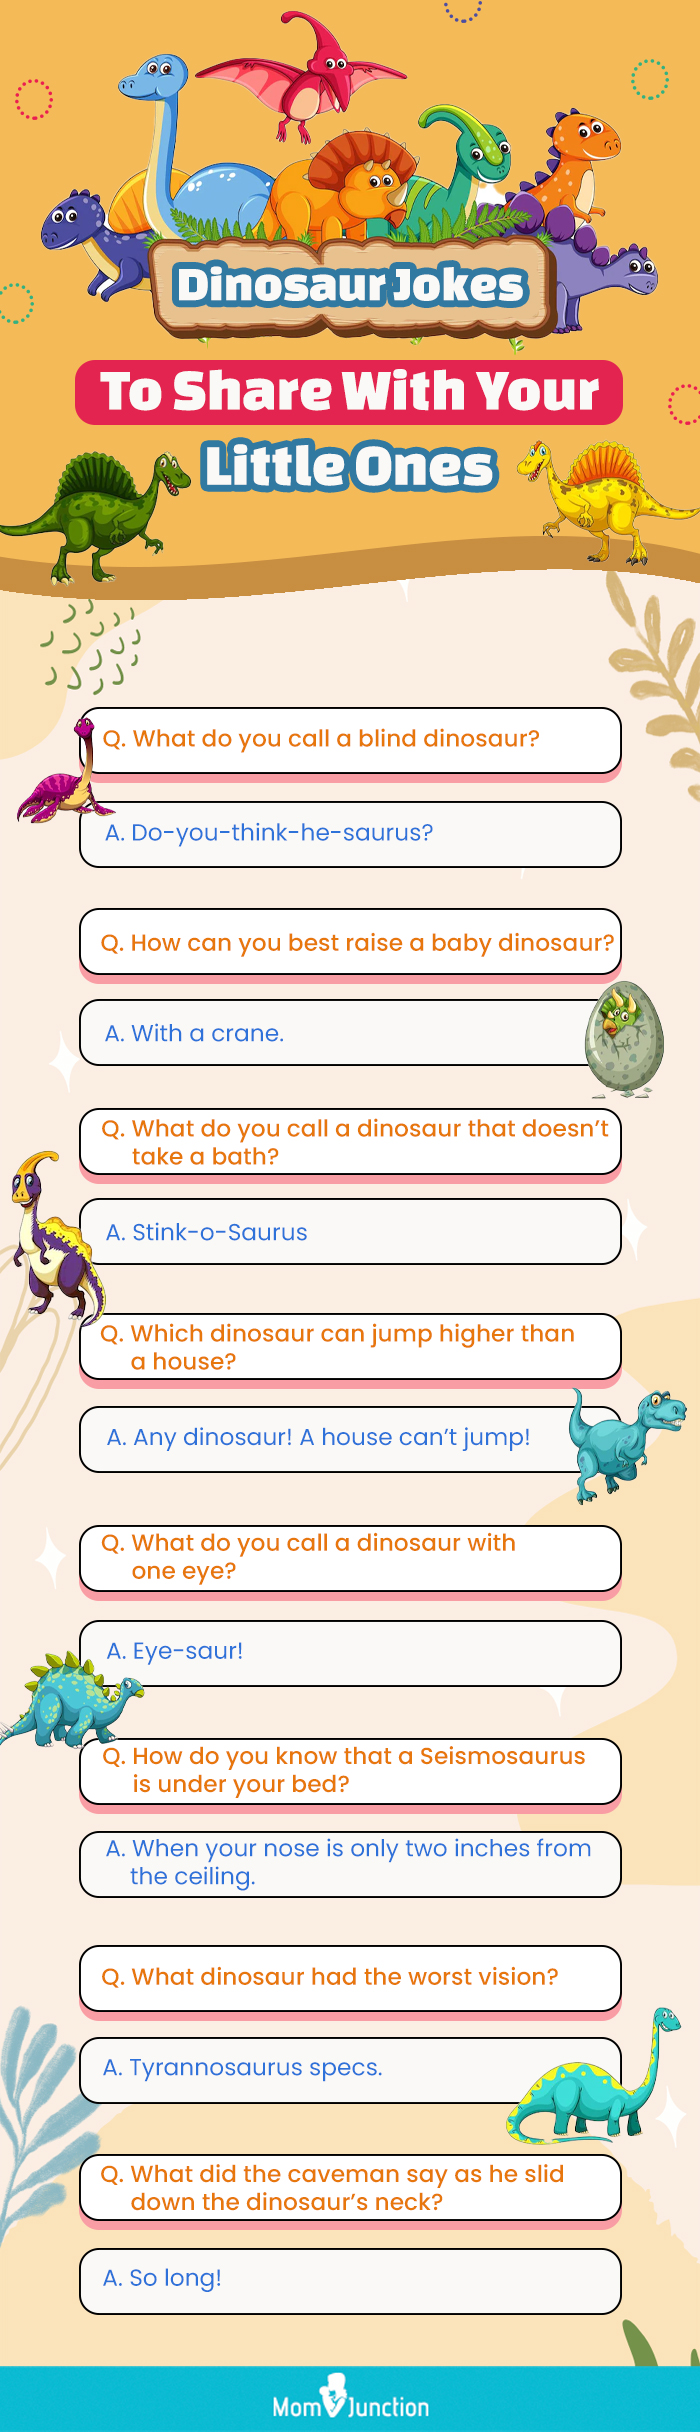 dinosaur jokes to share with your little ones [infographic]